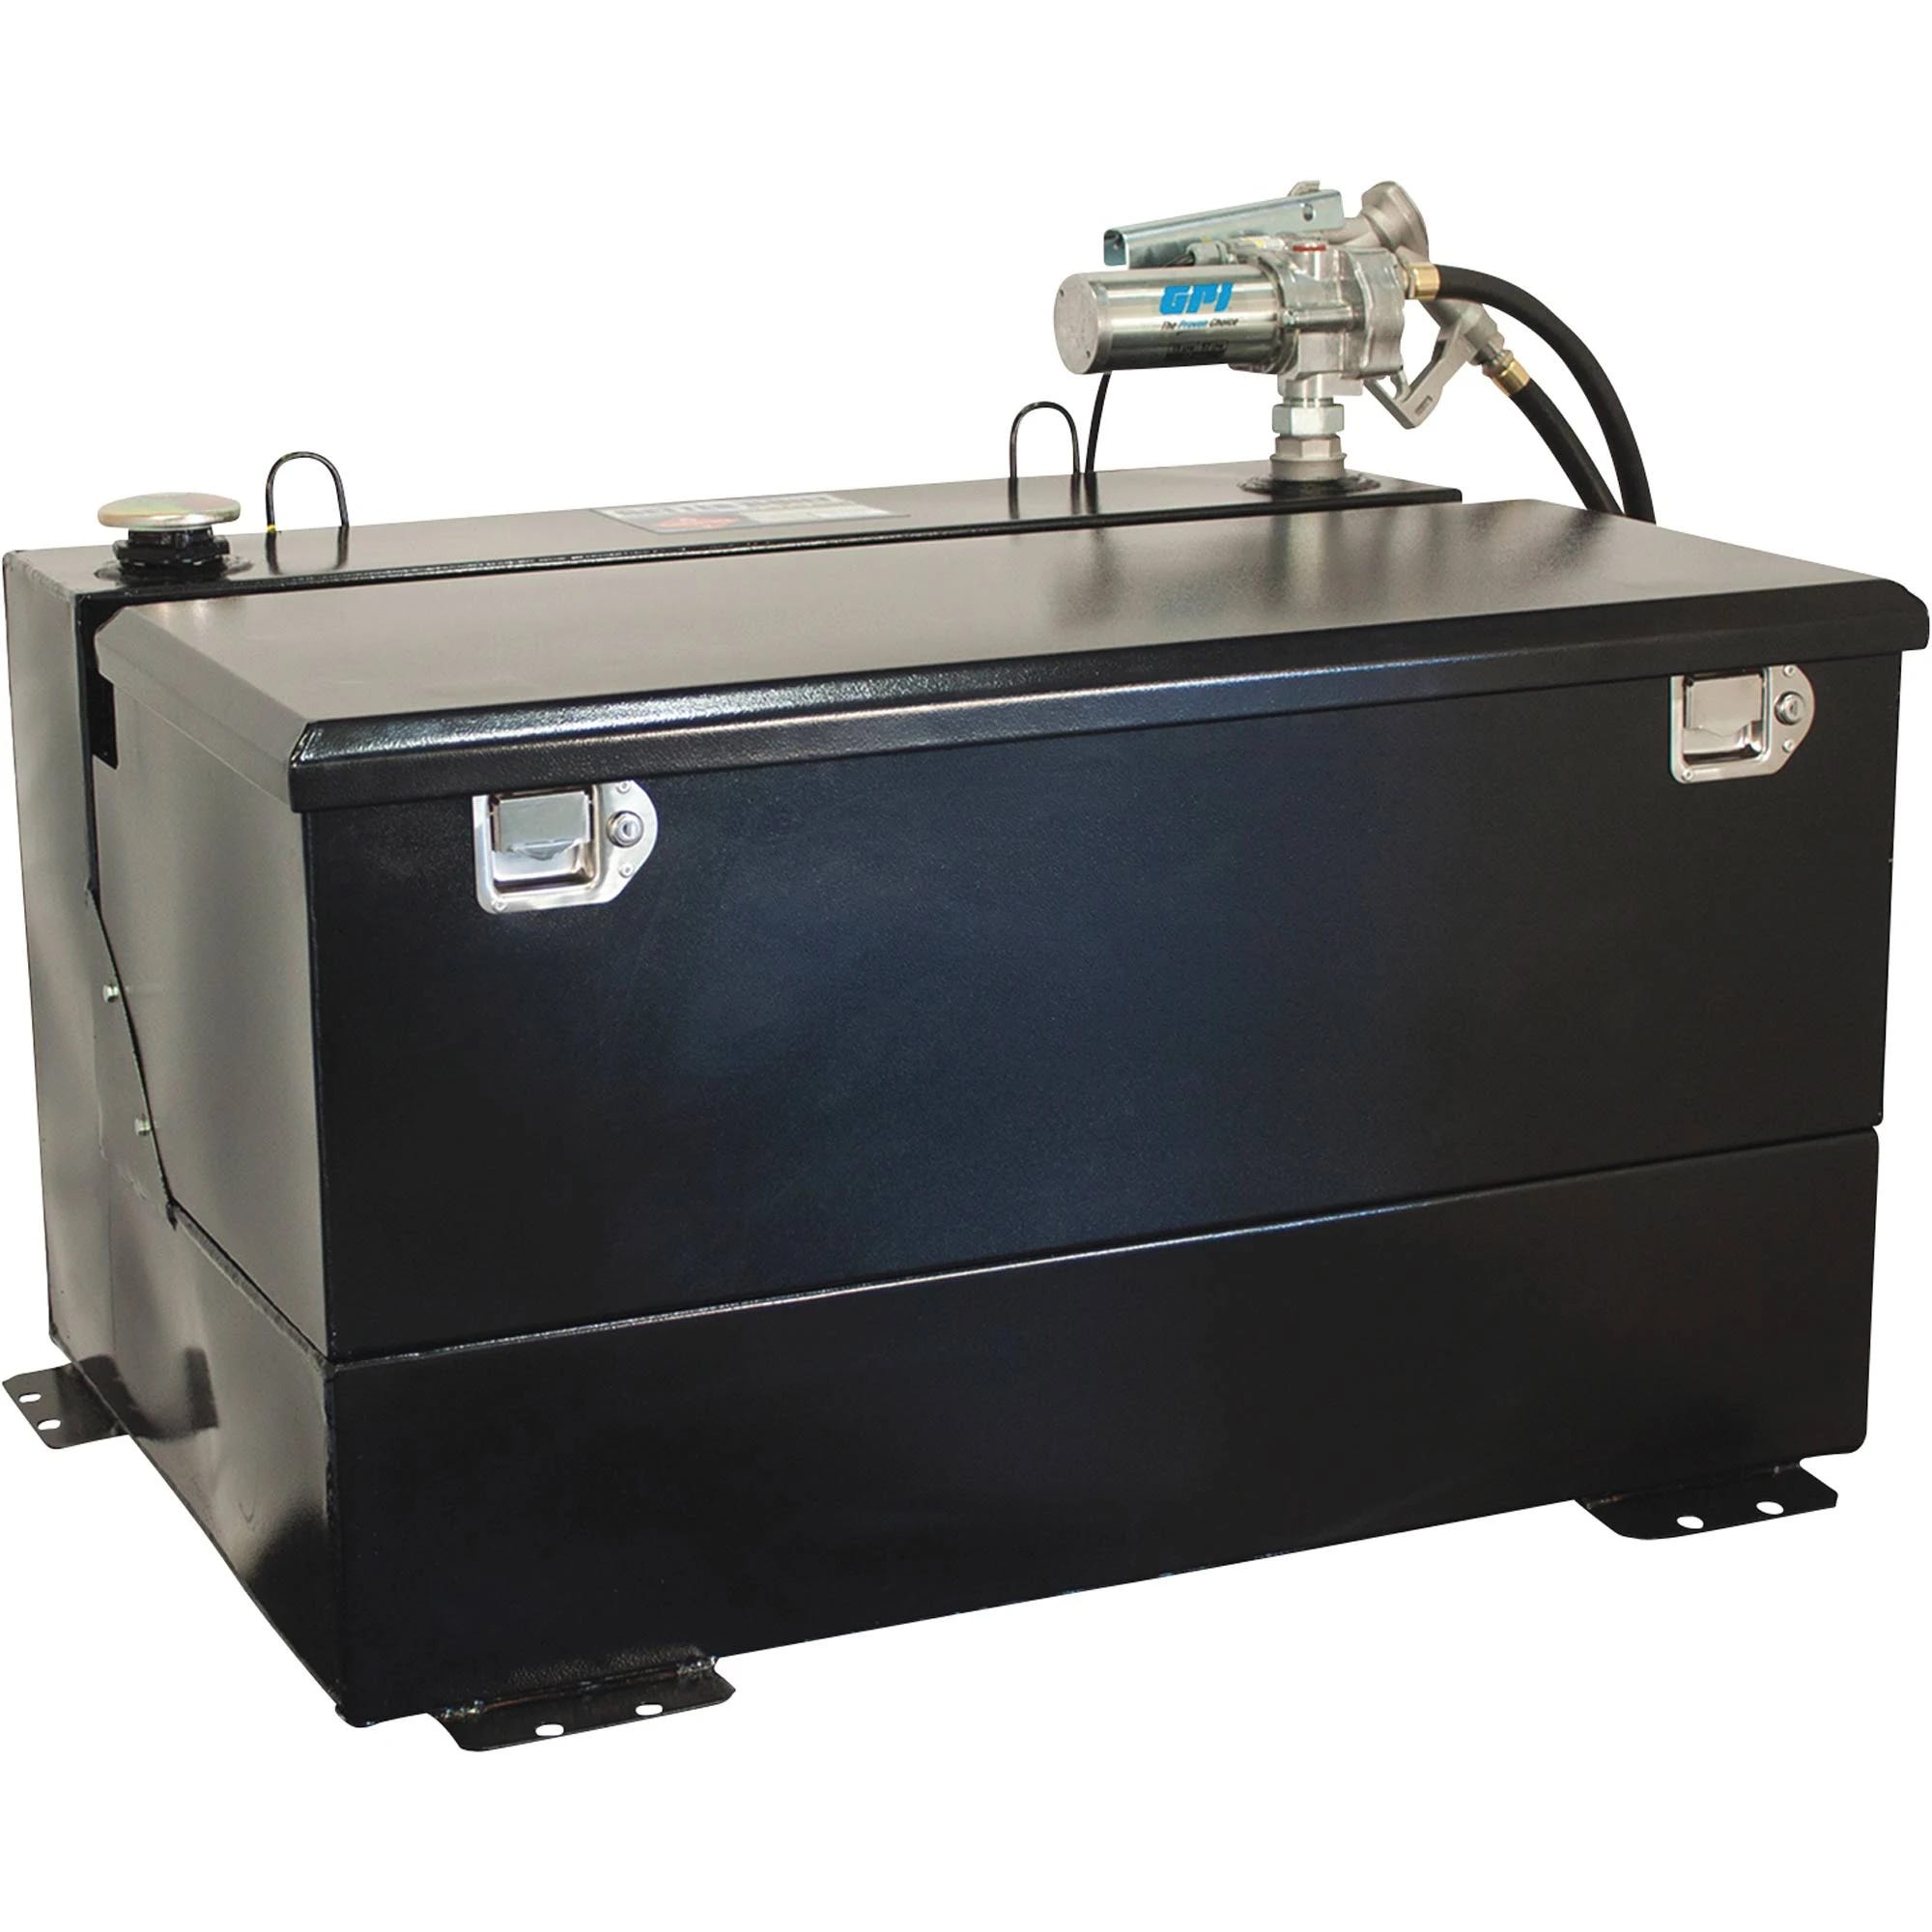 Durable Fuel Tank for Non-Flammable Fuel Storage | Image